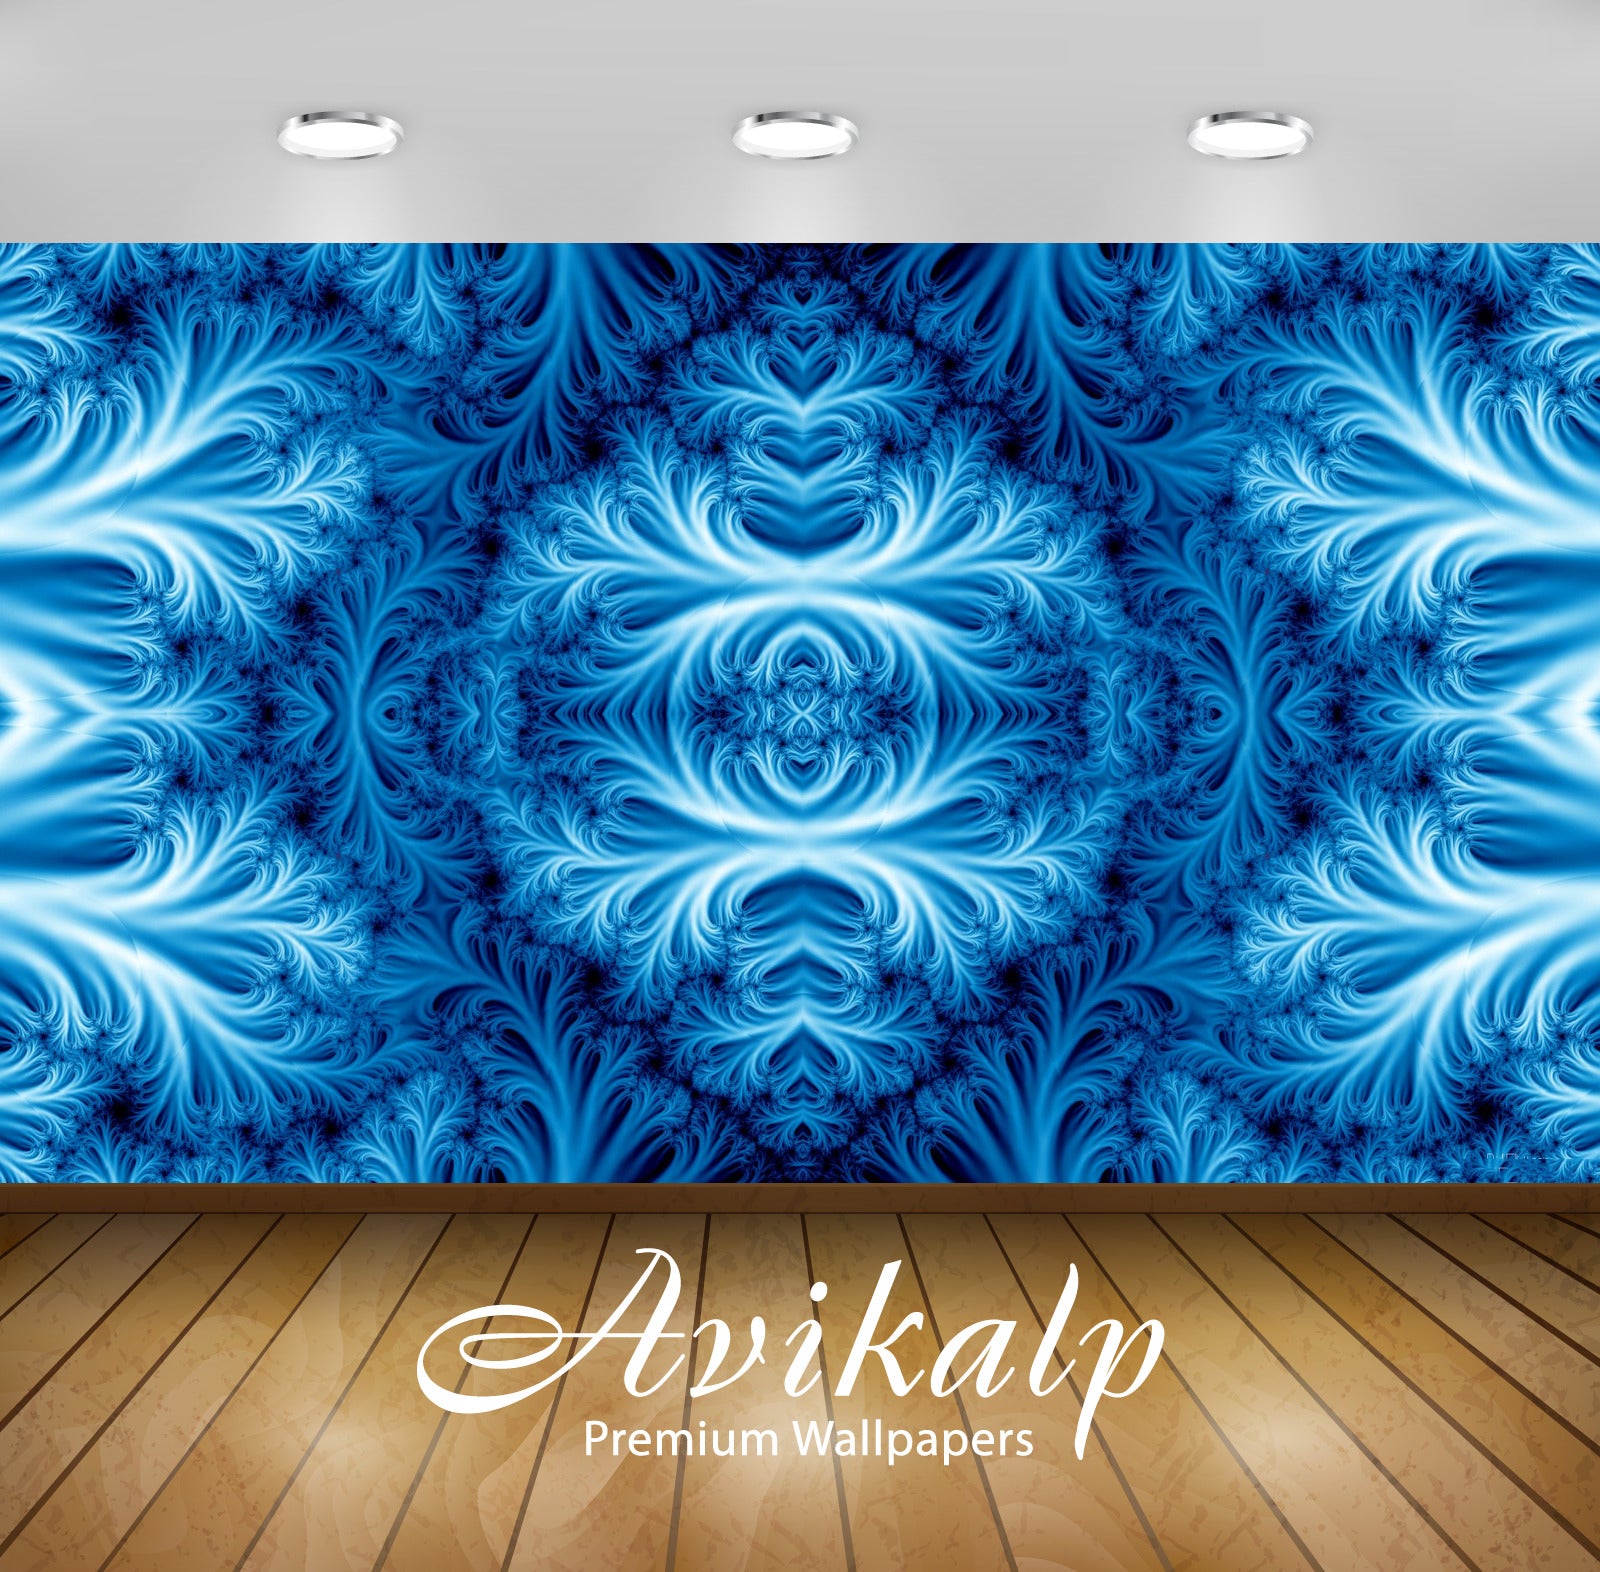 Avikalp Exclusive Awi4061 Blue Fractal Ice Full HD Wallpapers for Living room, Hall, Kids Room, Kitc